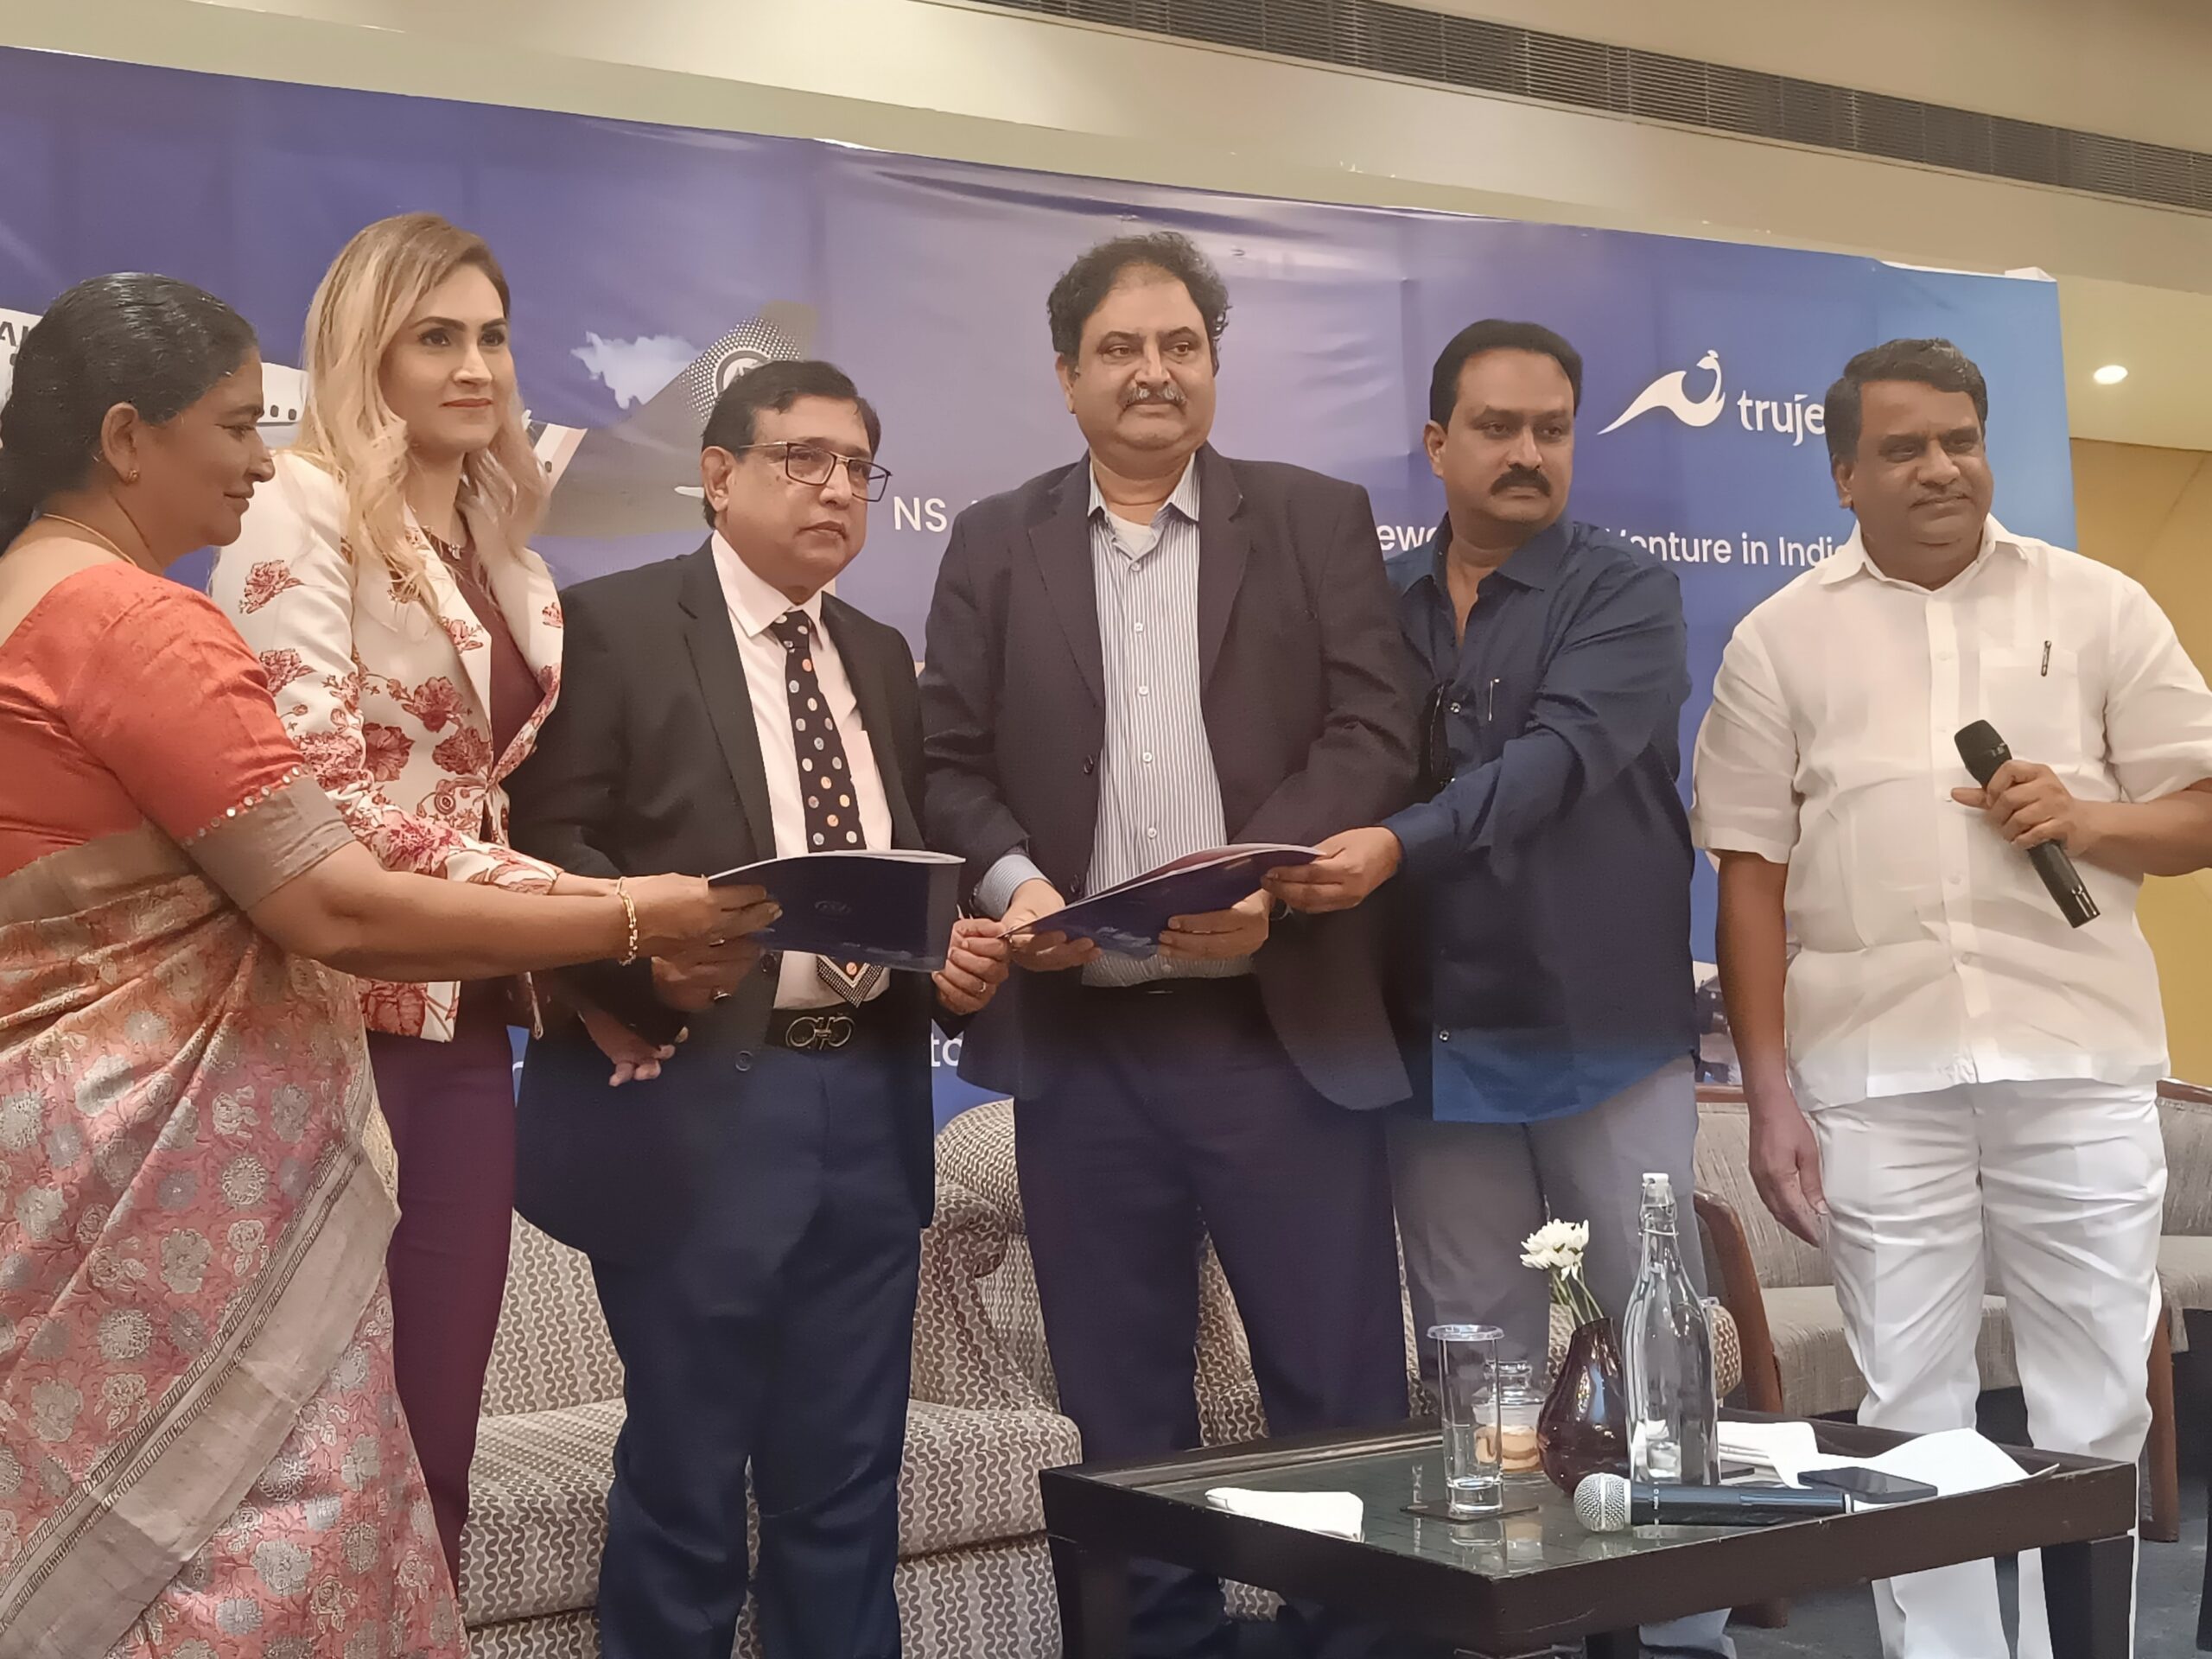 TruJet to take off again; NS Aviation launches new airline in India